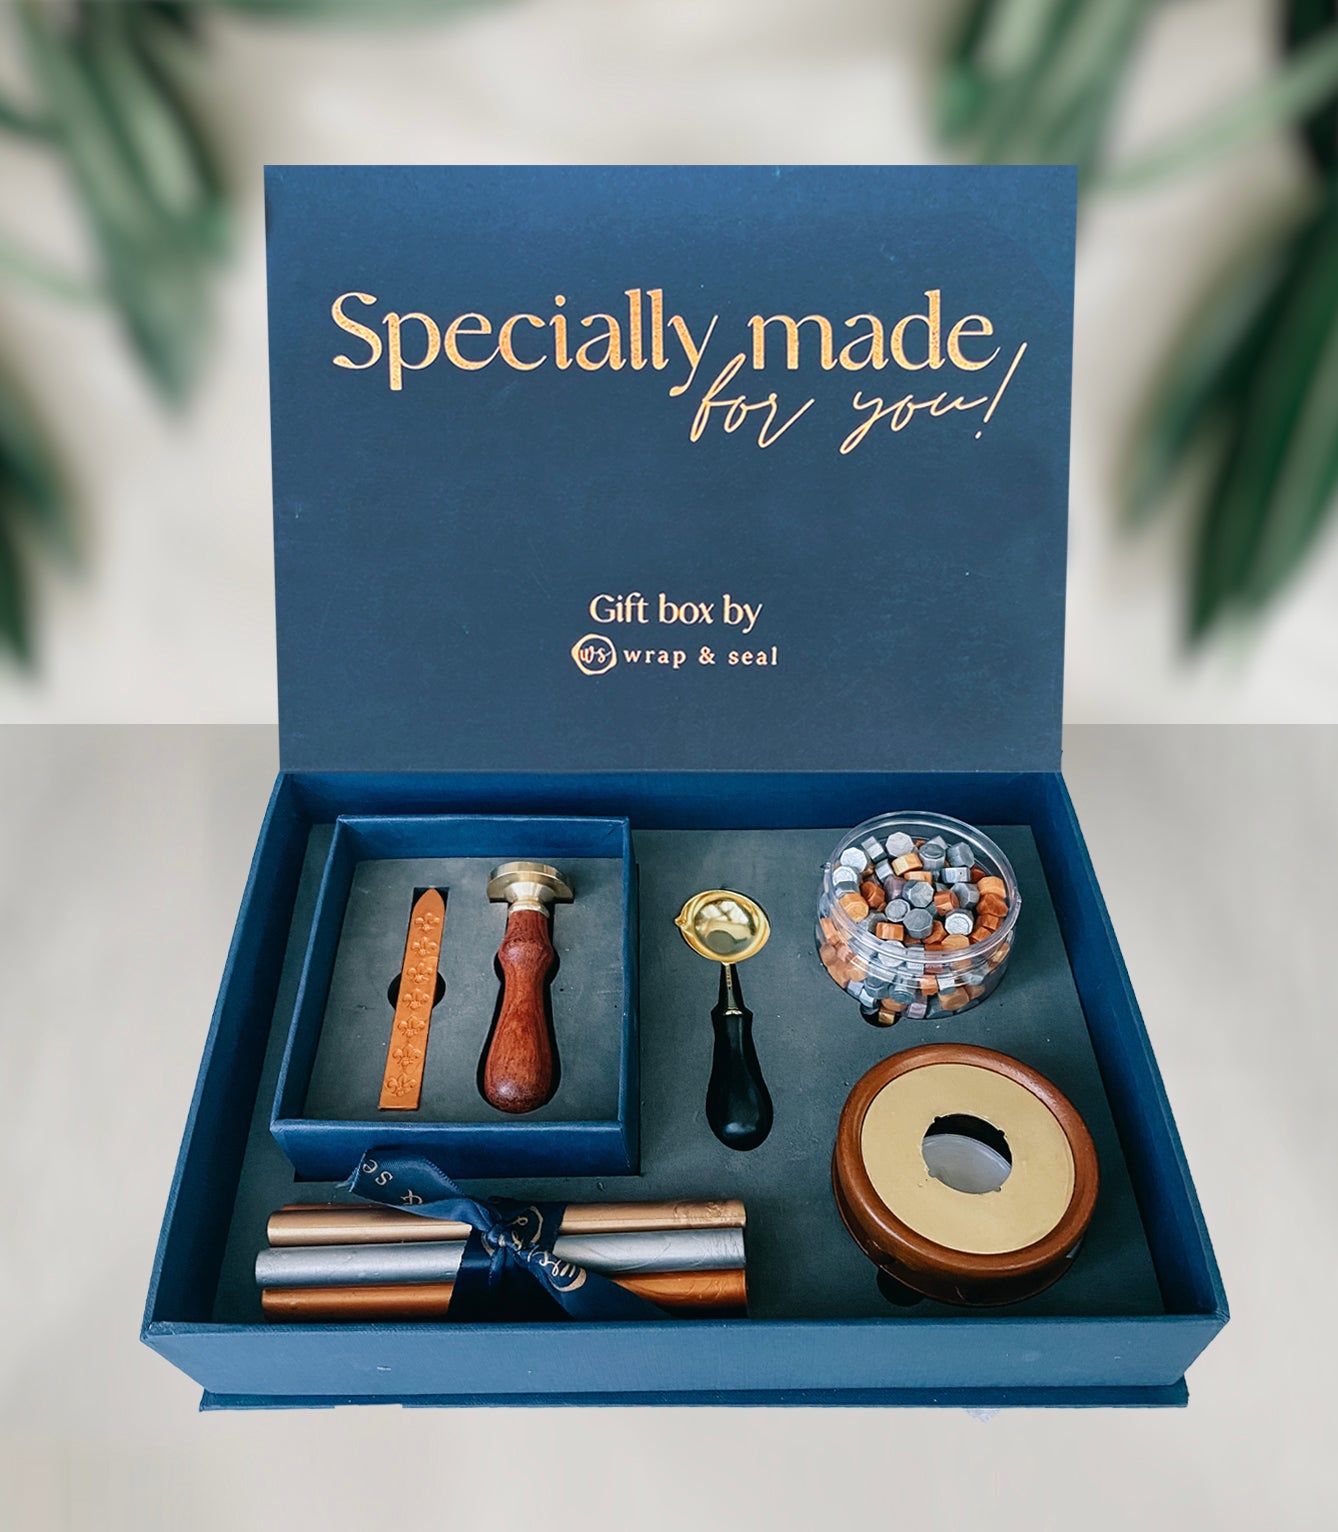 This Customized Stamp Gift Set is the perfect way to liven up your stationery. The wax sealing kit includes everything you need to craft beautiful stamps with custom logo motifs or monogram ensuring you make a unique impression. Perfect for adding a special flair to occasion cards and envelopes!